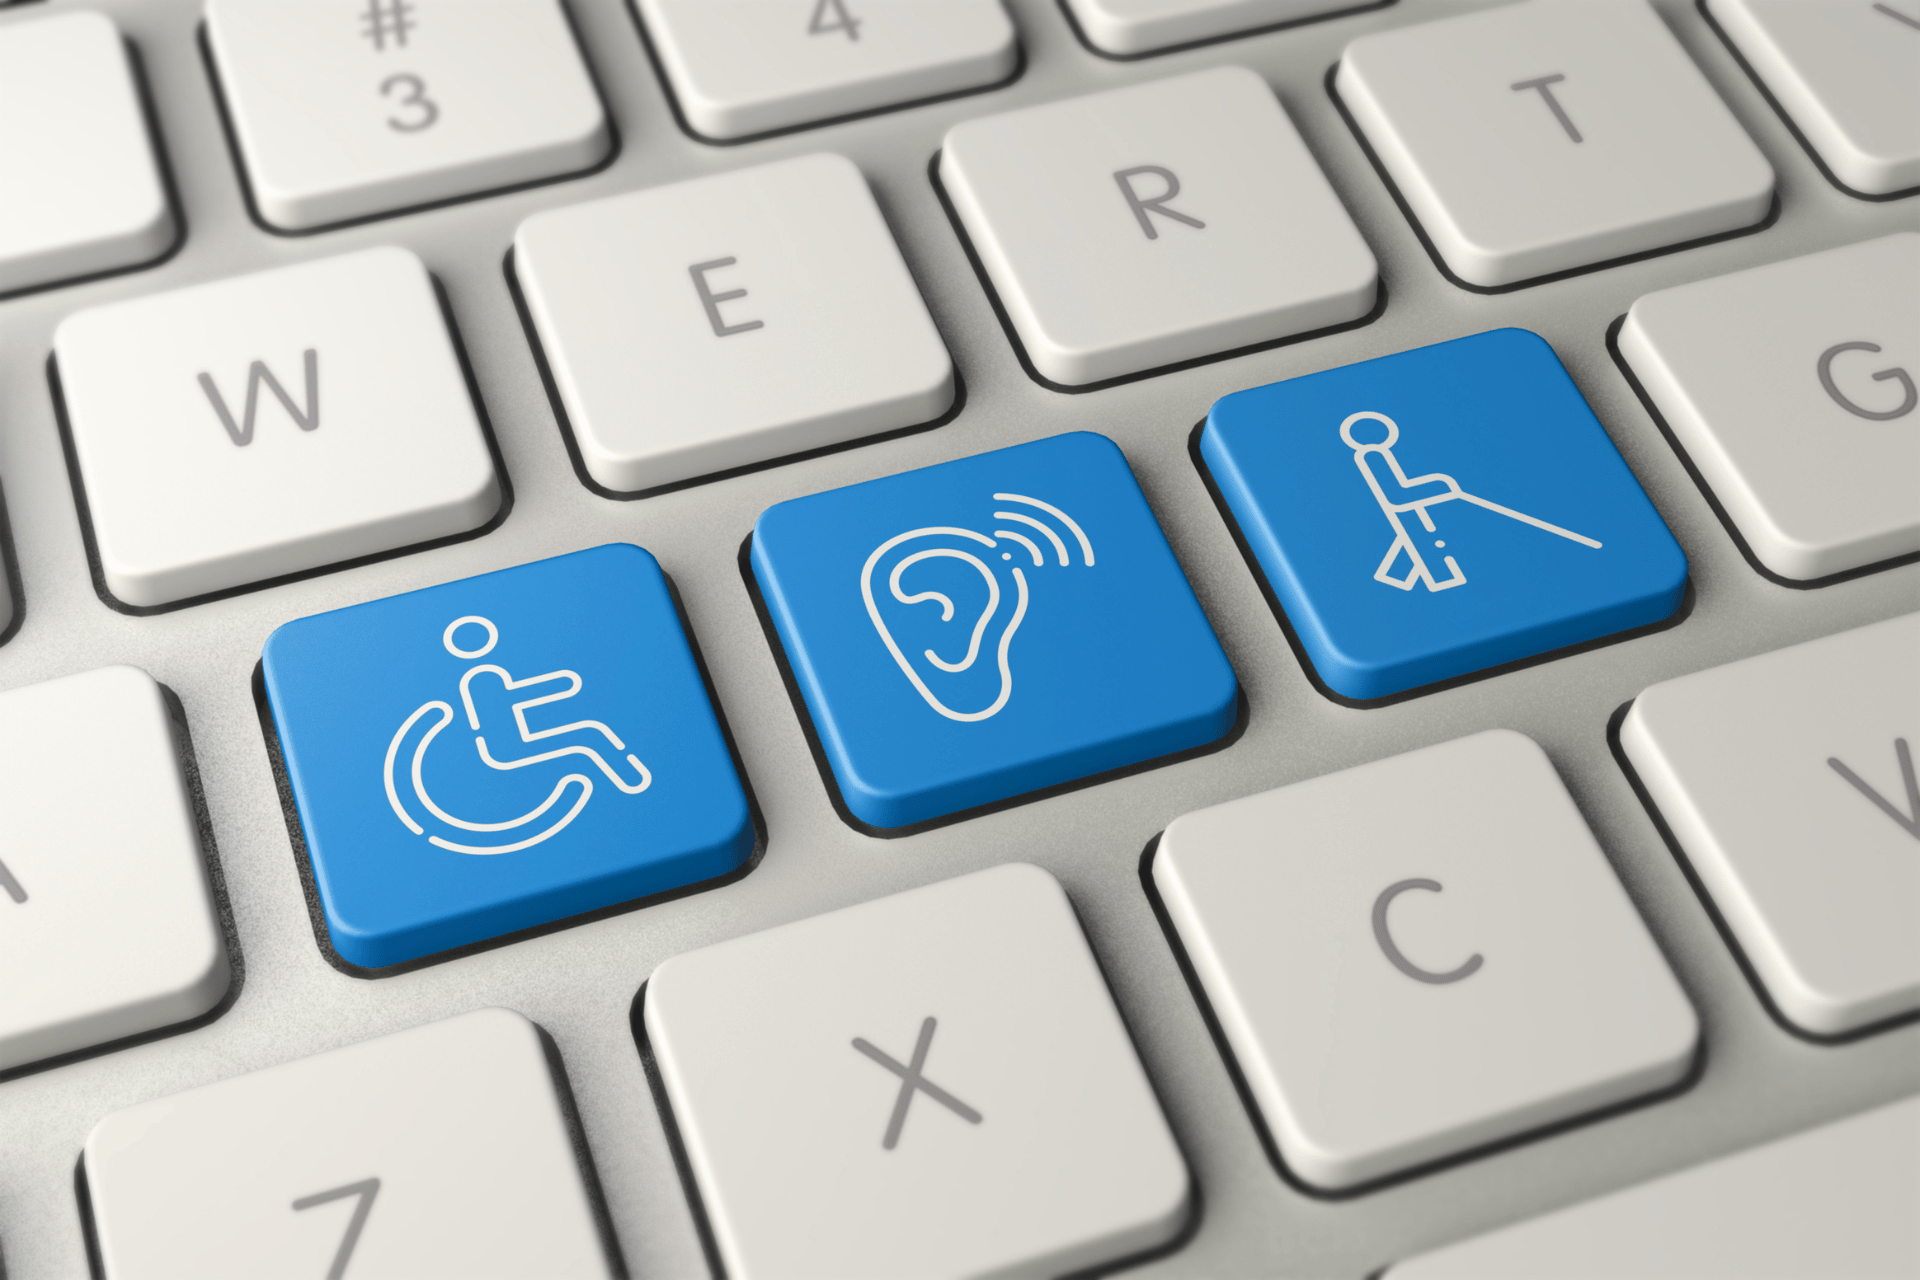 An example of the current disability icons